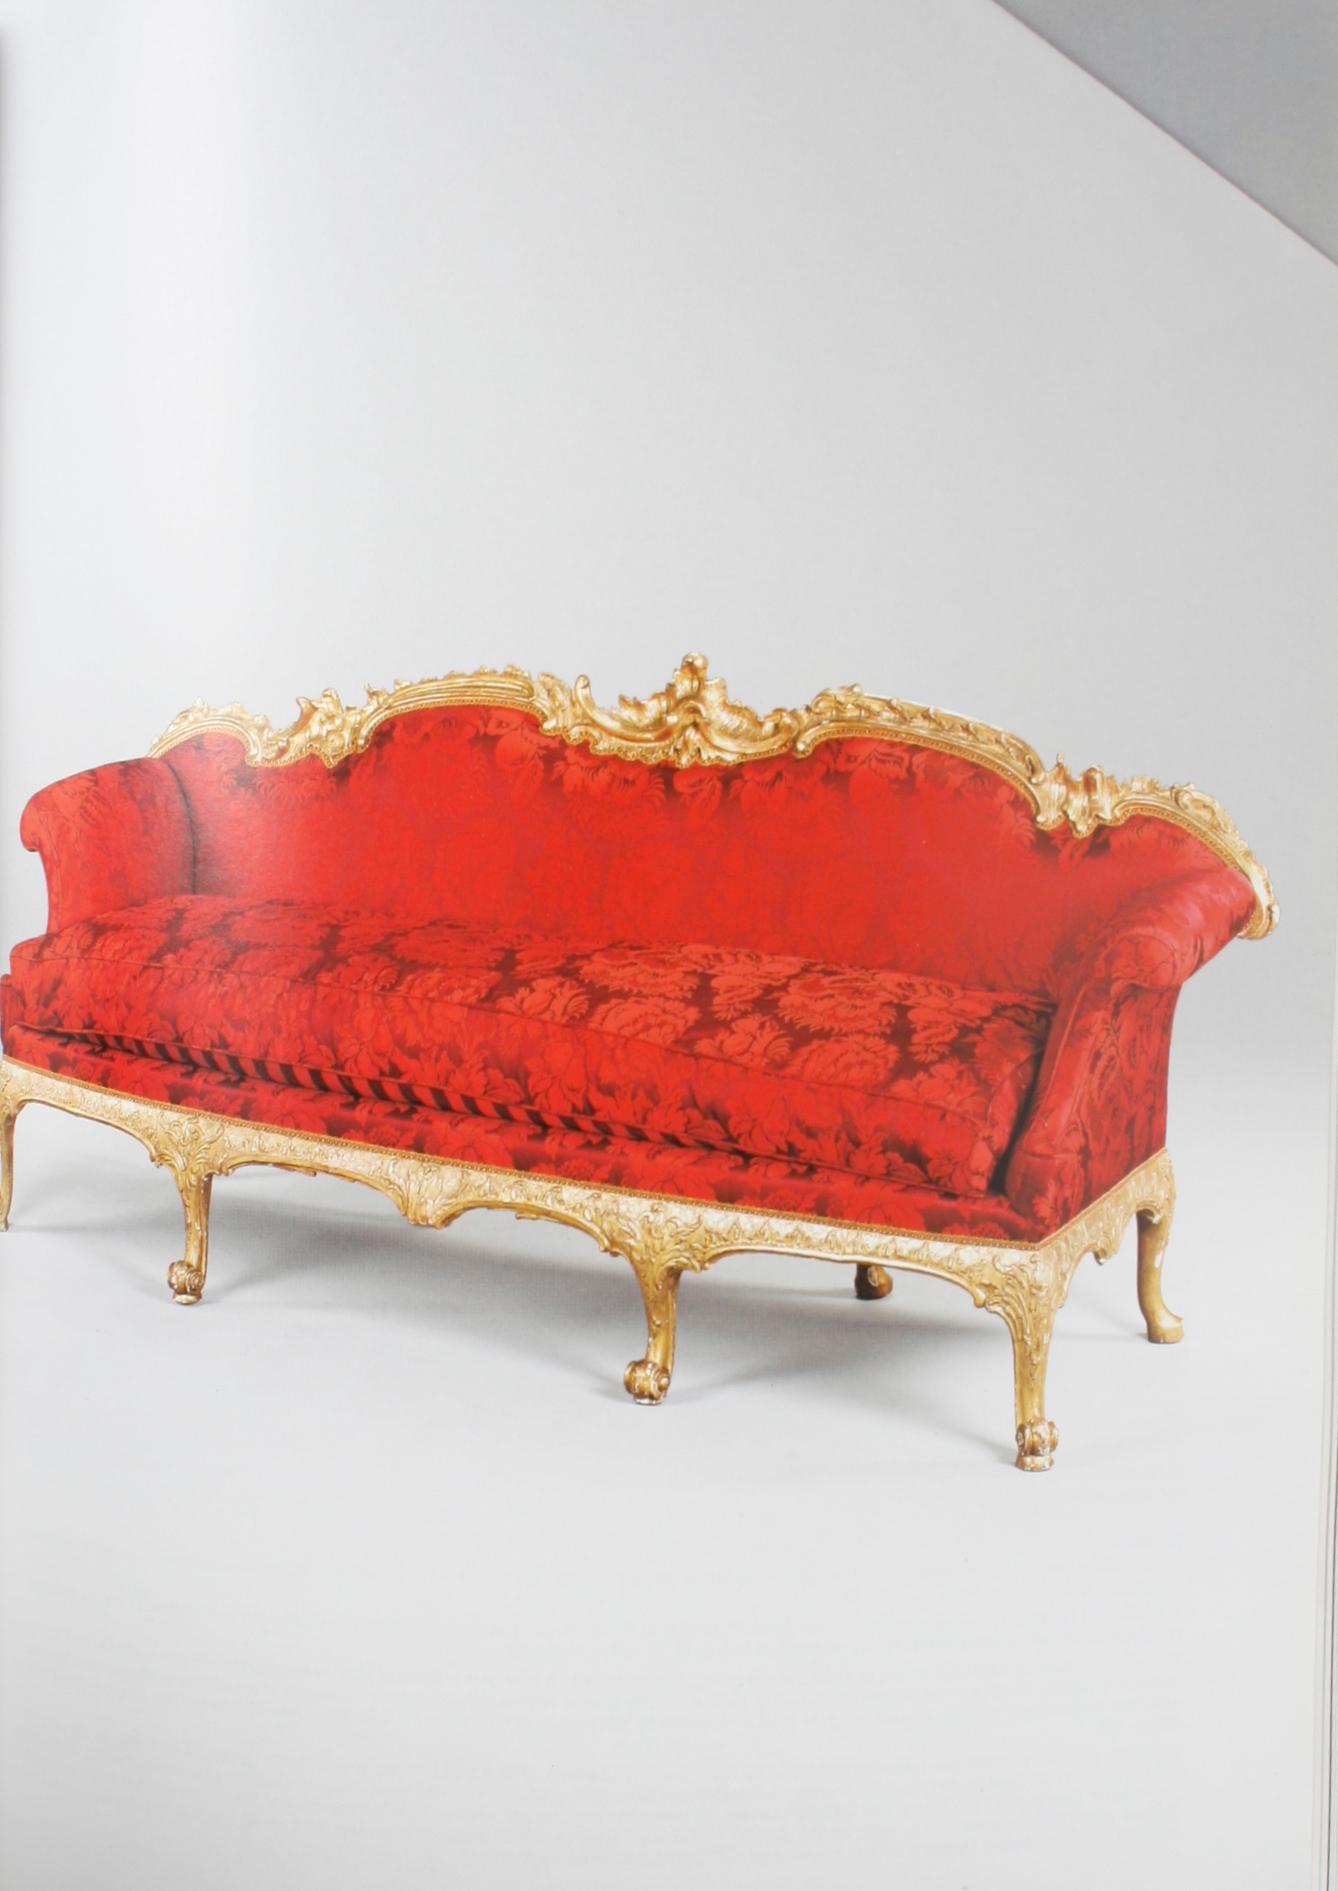 Paper Christie's Important English Furniture, from Collections Peter Glenville For Sale